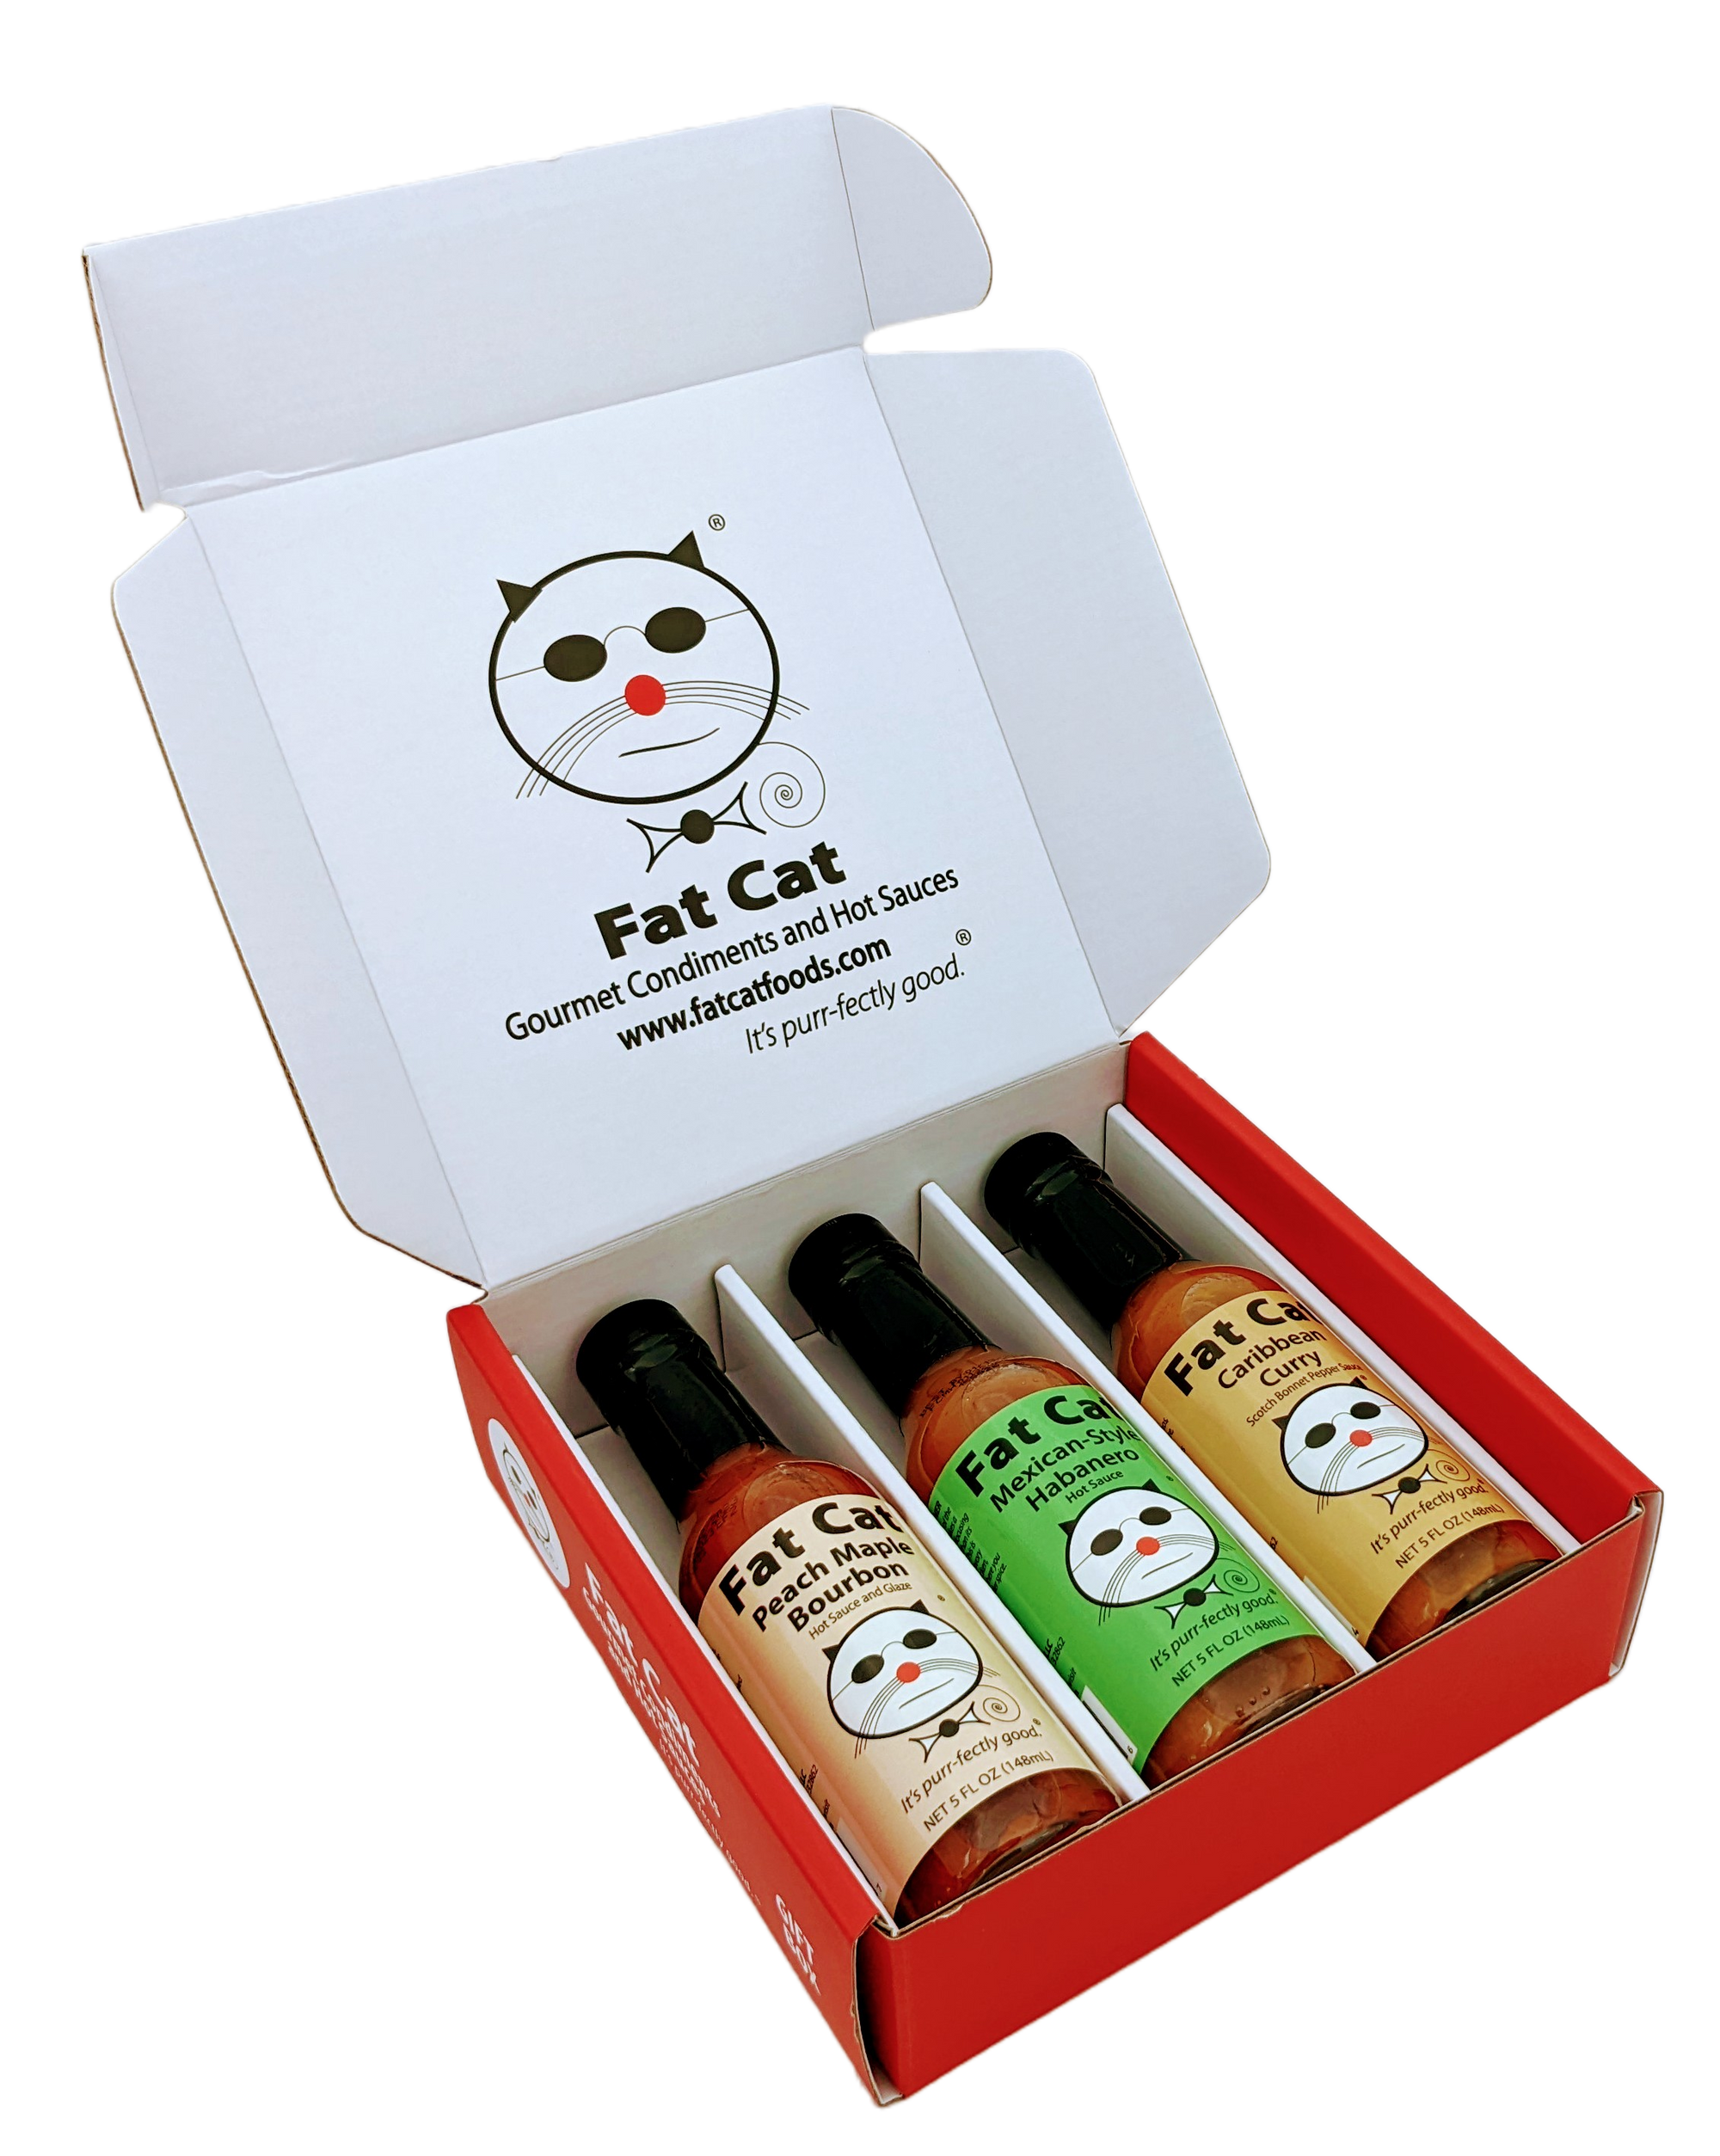 Grill Lovers Hot Sauce 3 Pack Gift Box - Fat Cat Gourmet Hot Sauce & Specialty Condiments